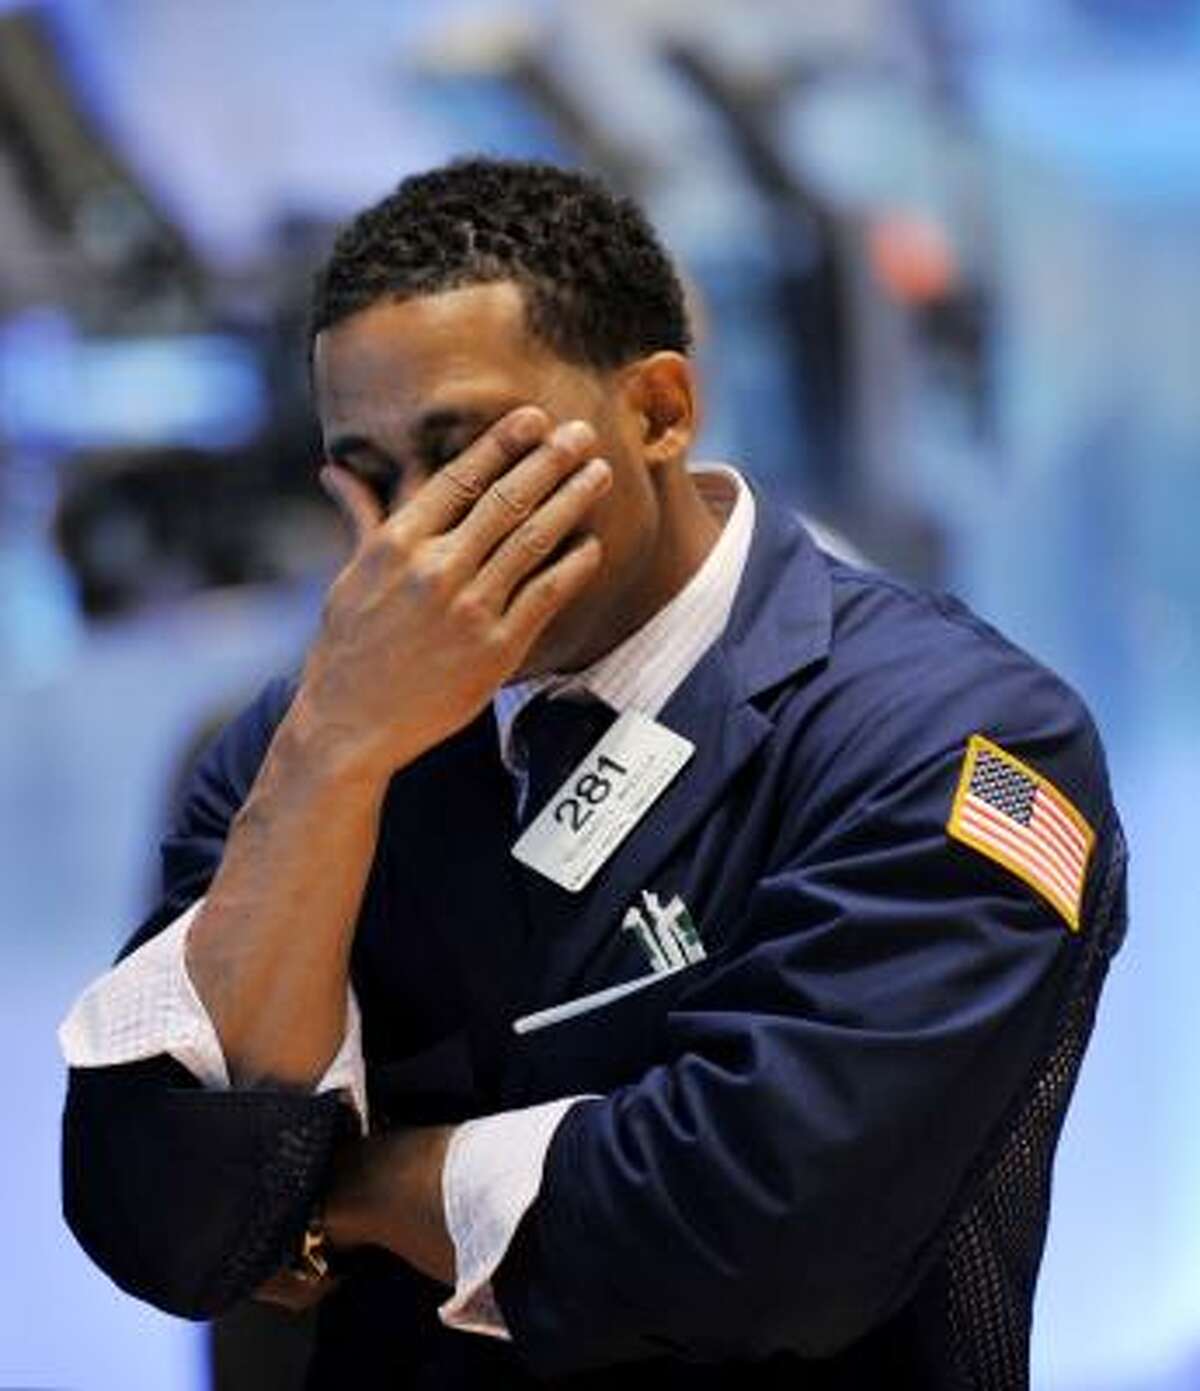 Traders at the New York Stock Exchange could do little but watch on Thursday as the Dow recorded its steepest point decline since Dec. 1, 2008.